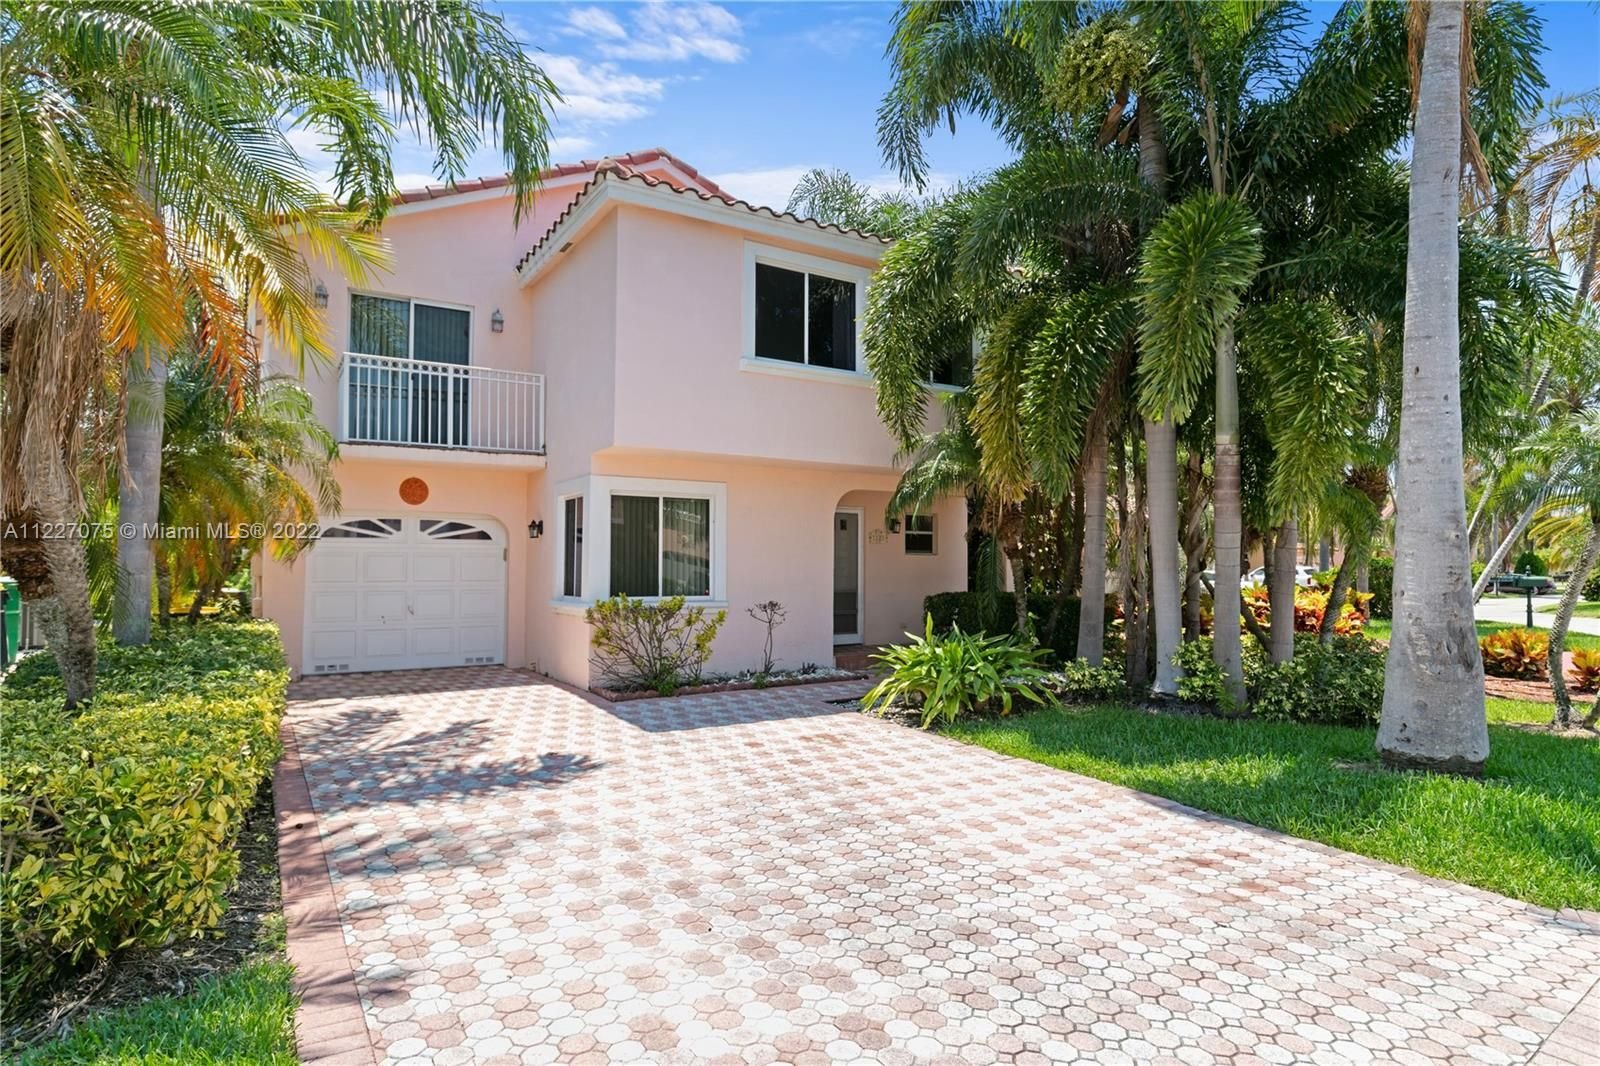 Real estate property located at 1121 6th Ave, Broward County, Dania Beach, FL